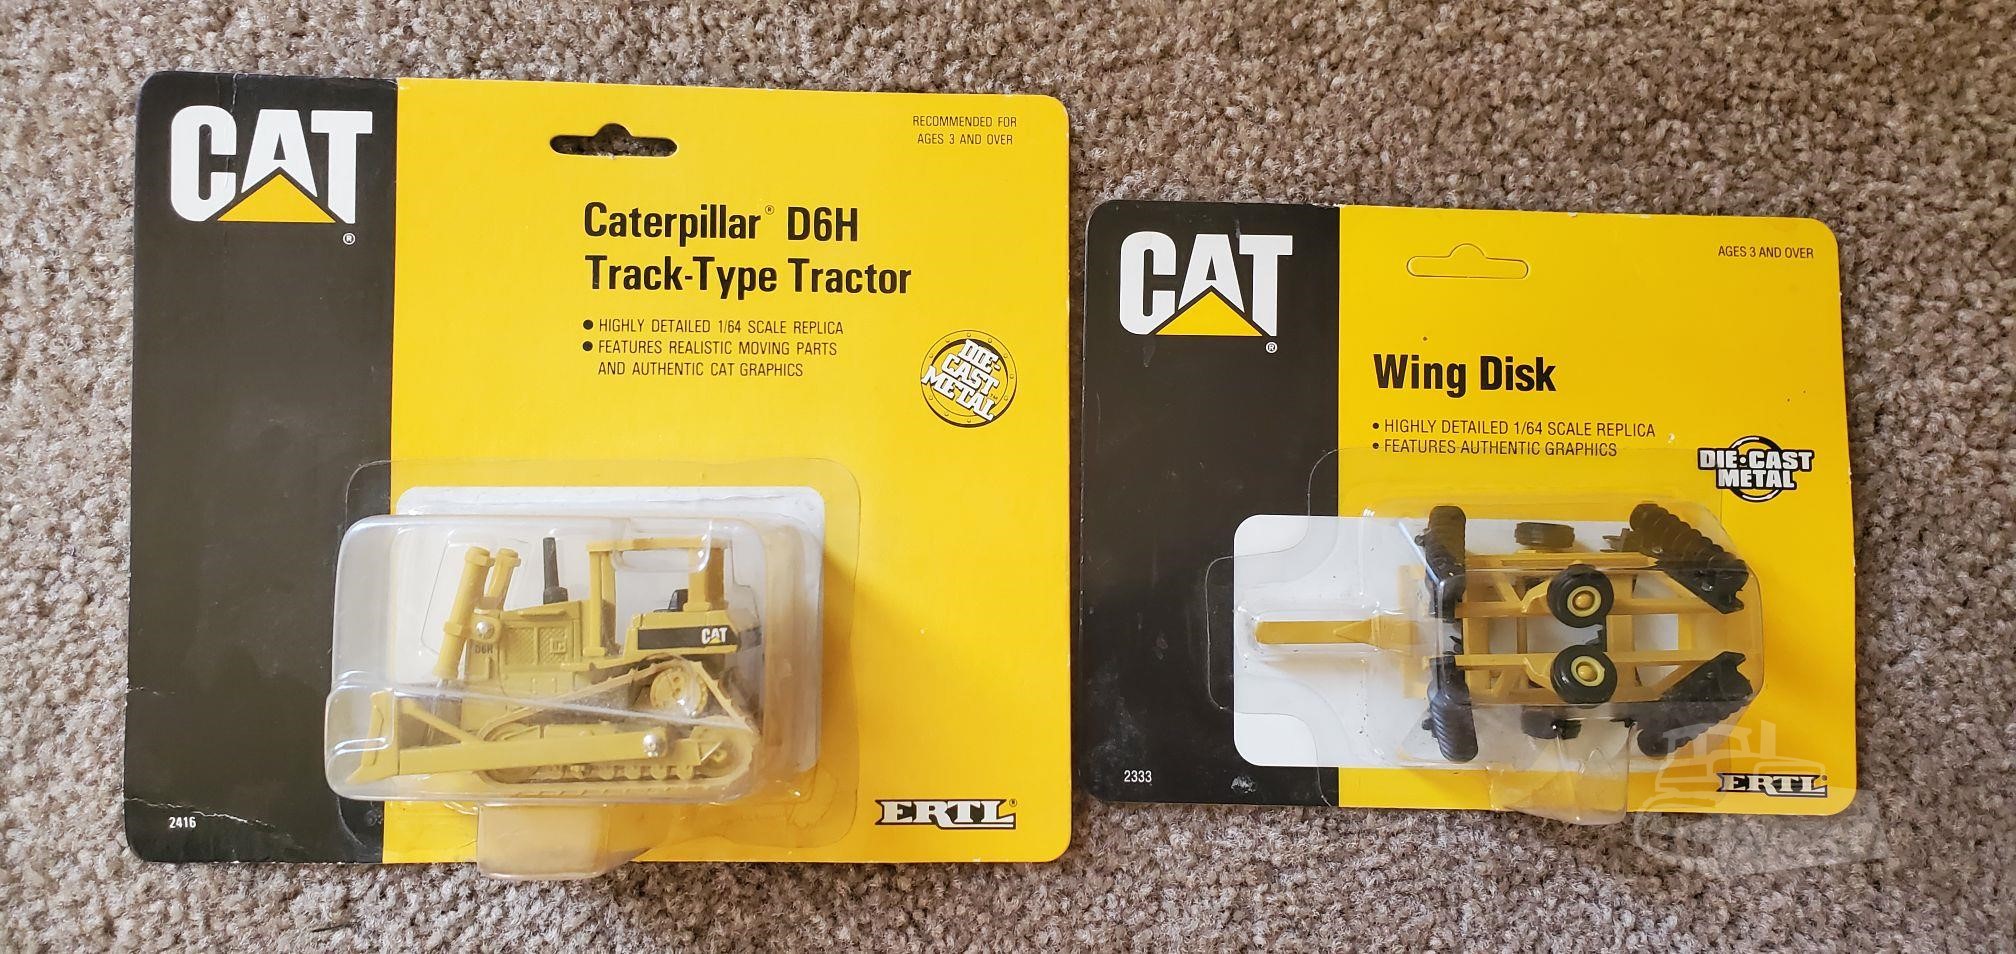 Caterpillar Other Items For Sale 68 Listings Machinerytrader Com Page 1 Of 3